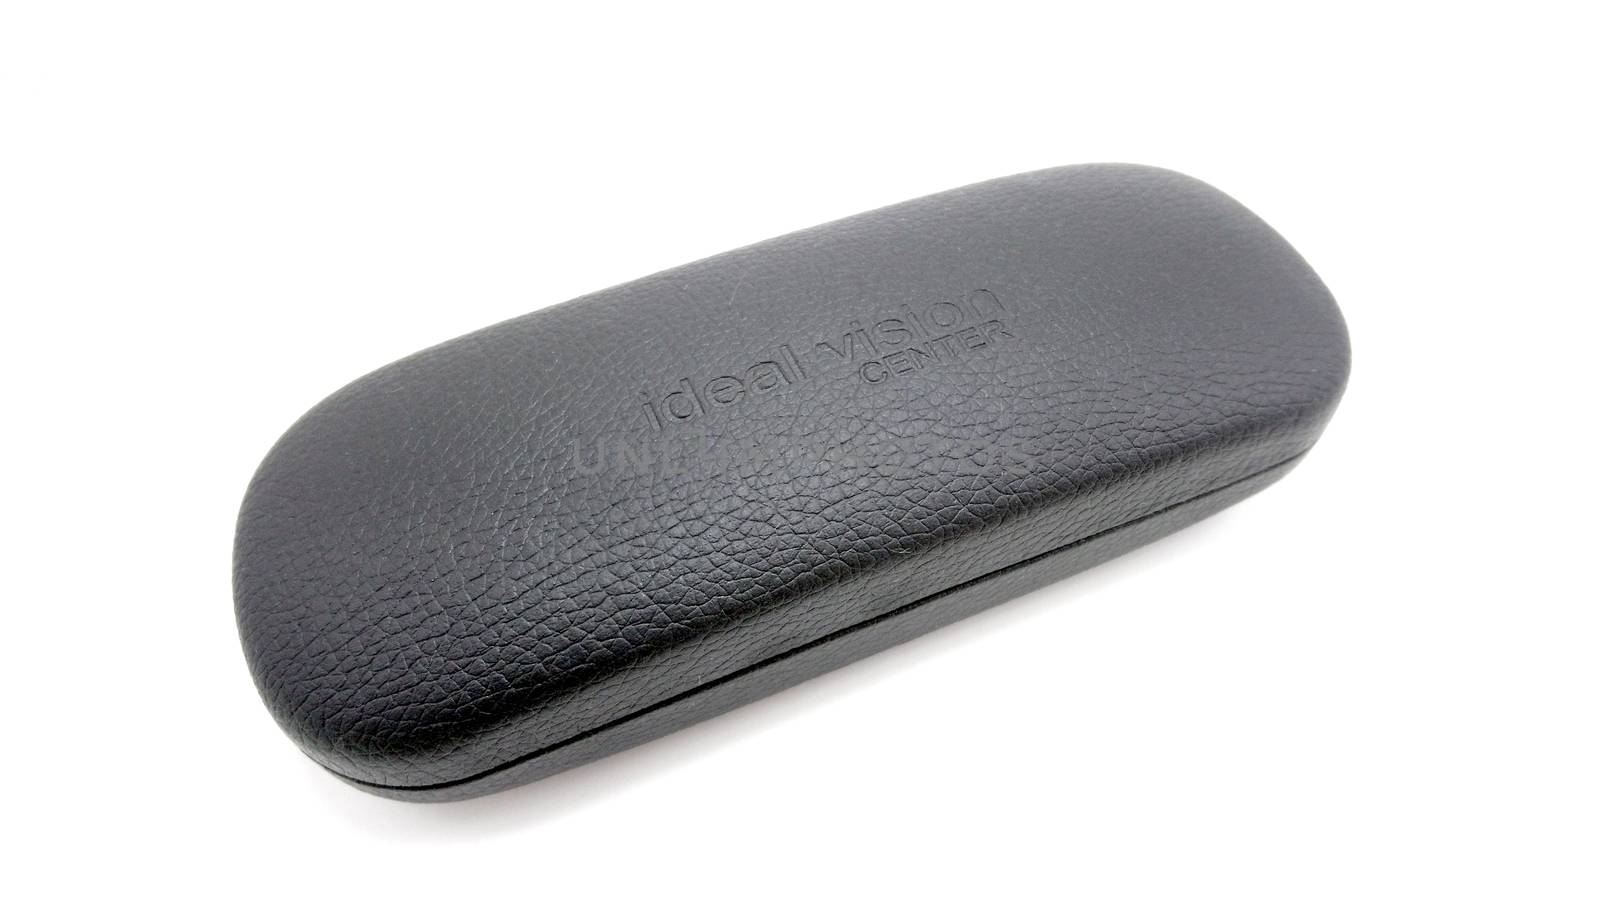 Ideal vision center eyeglass case in Manila, Philippines by imwaltersy